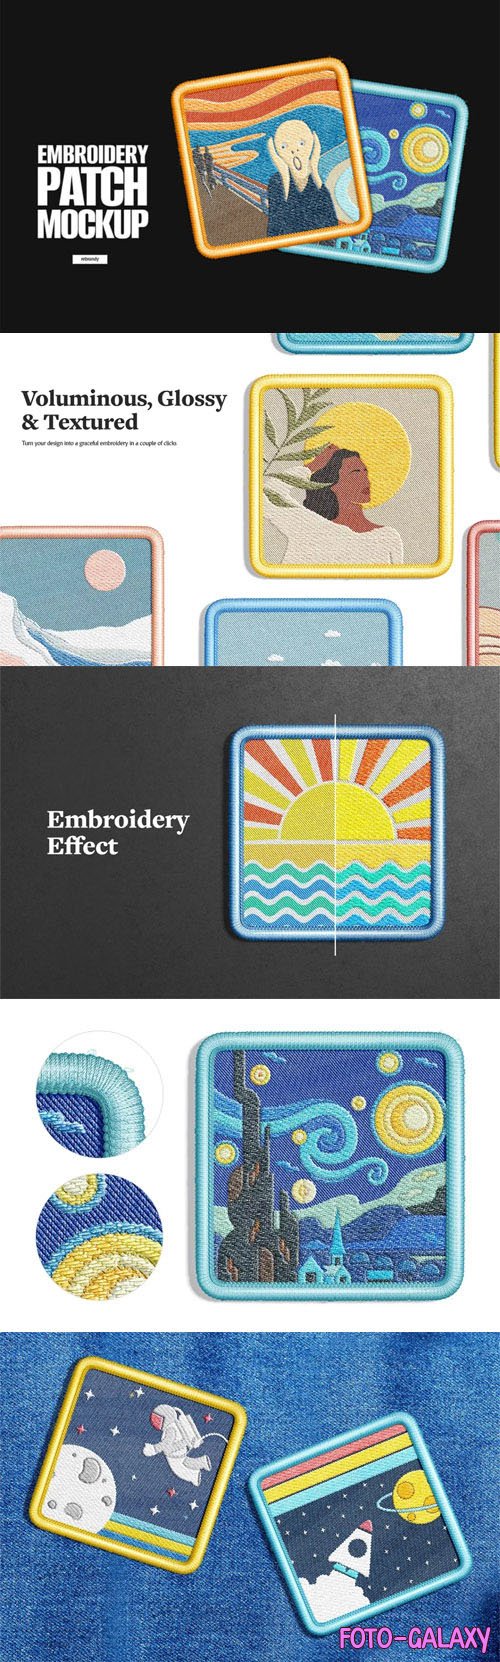 Square Embroidery Patch PSD Mockup Template + Photoshop Action